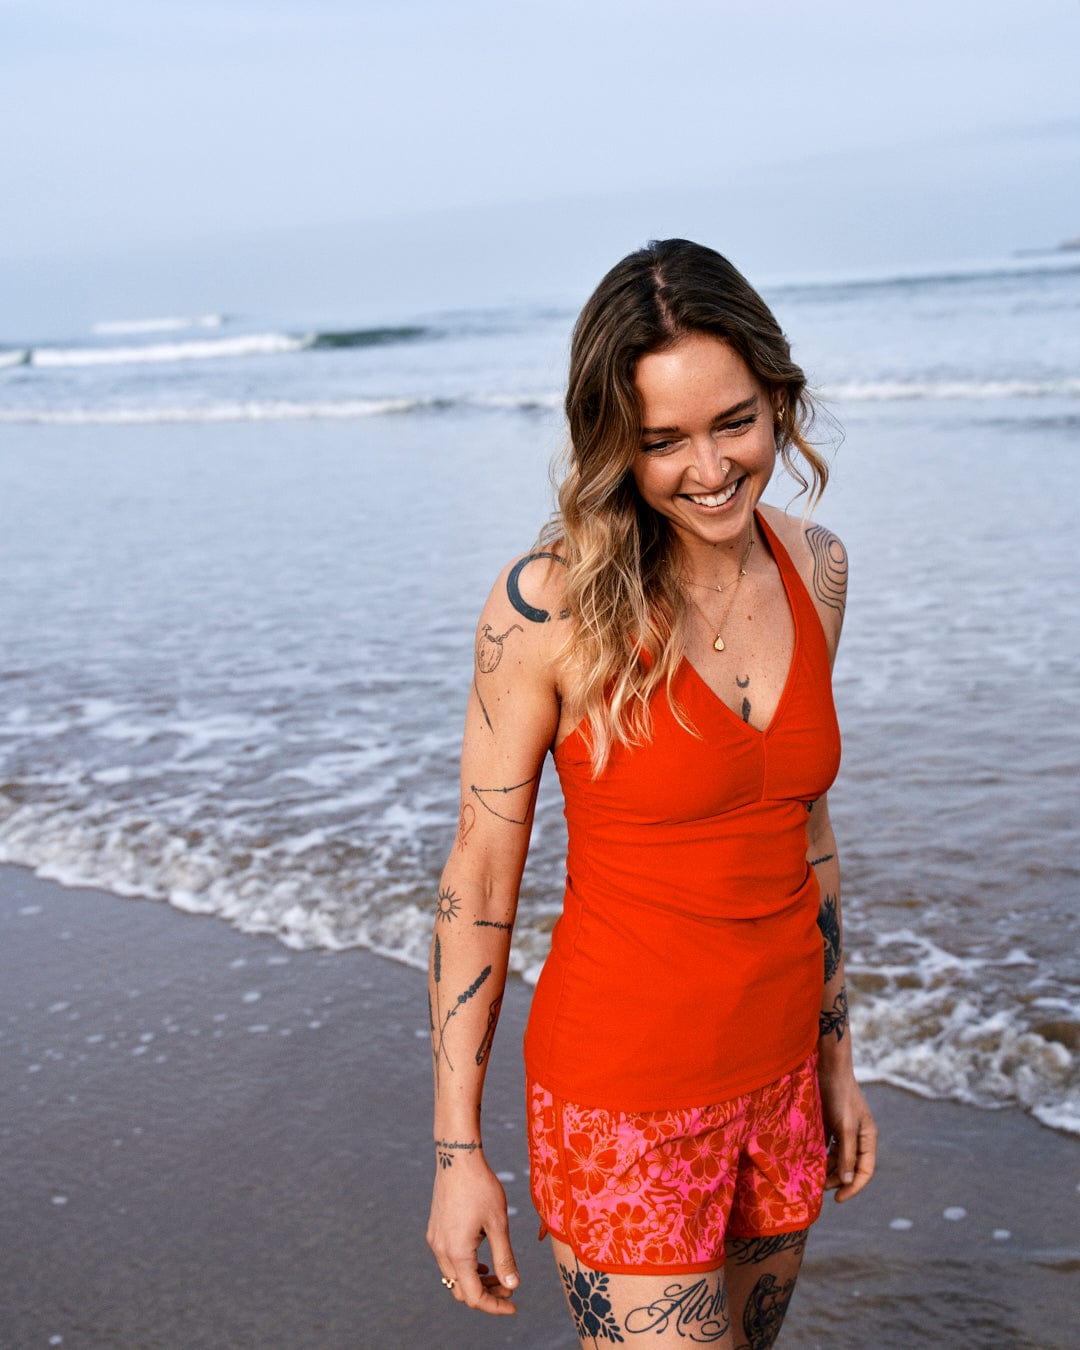 A woman in a red floral print top smiles as she walks along a beach, with waves in the background and tattoos visible on her arms wearing Saltrock's Hibiscus Womens Boardshorts in Red/Pink.